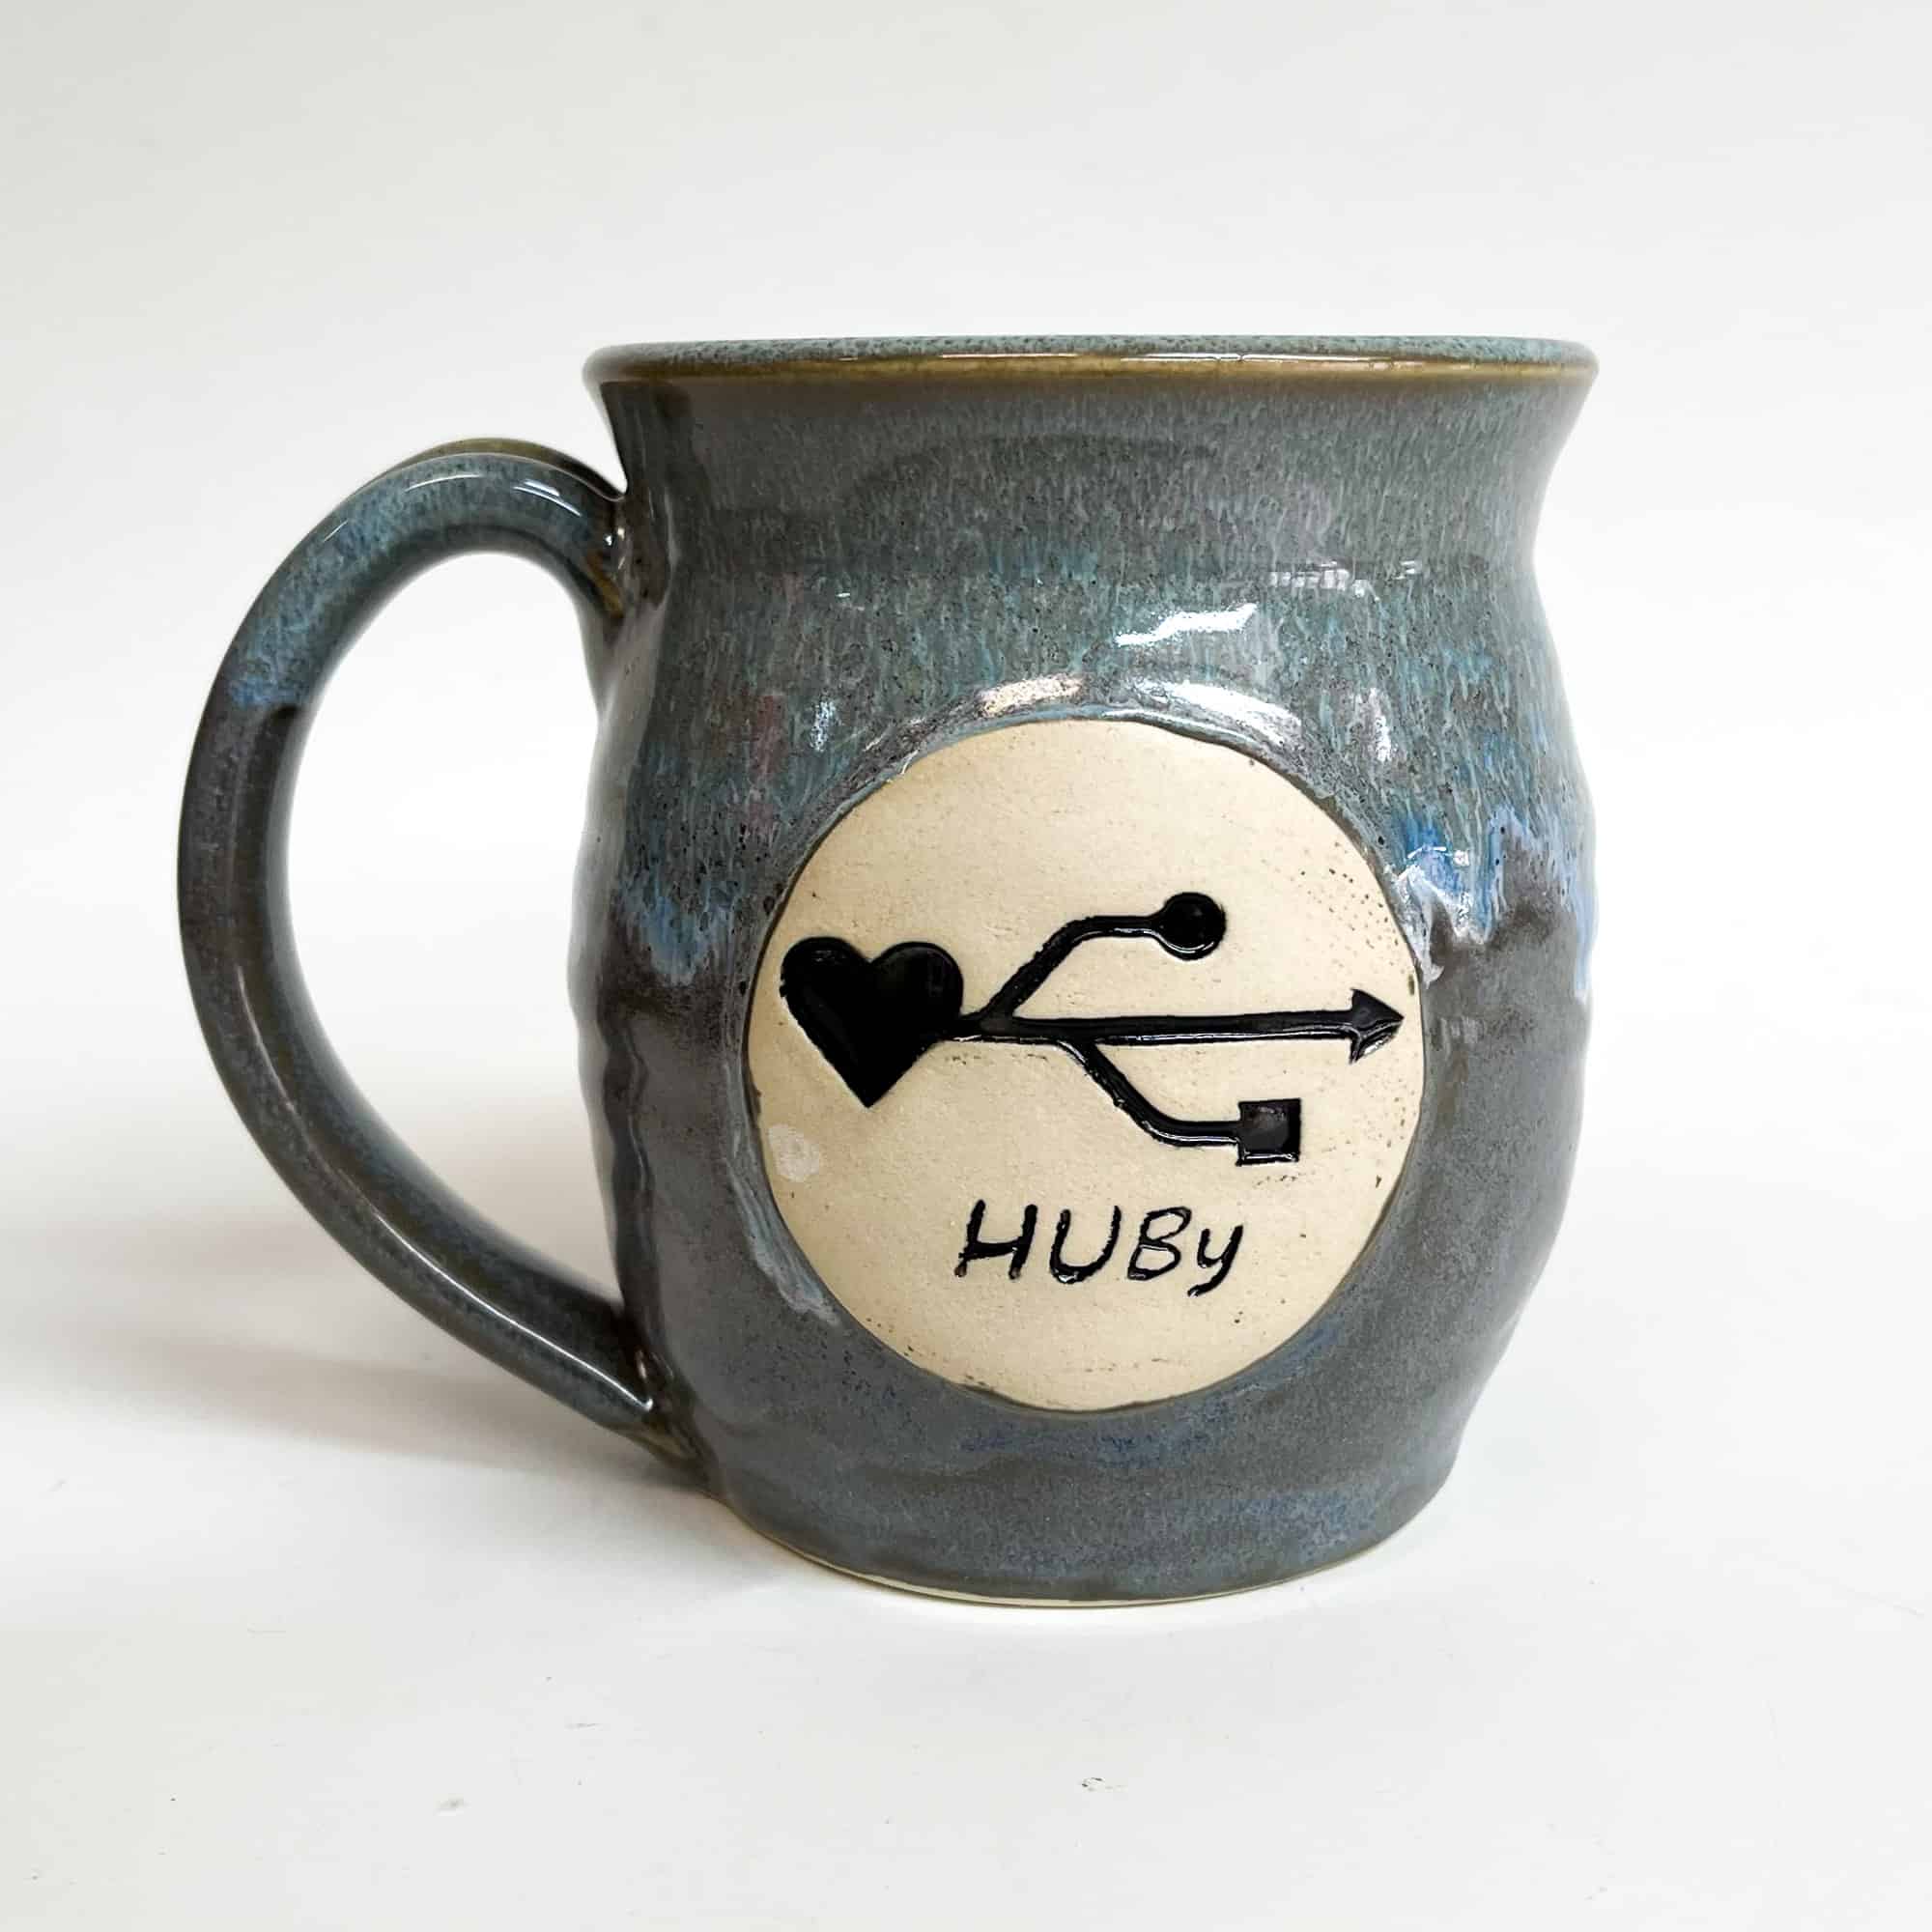 Painted Mugs that Are Dishwasher Safe